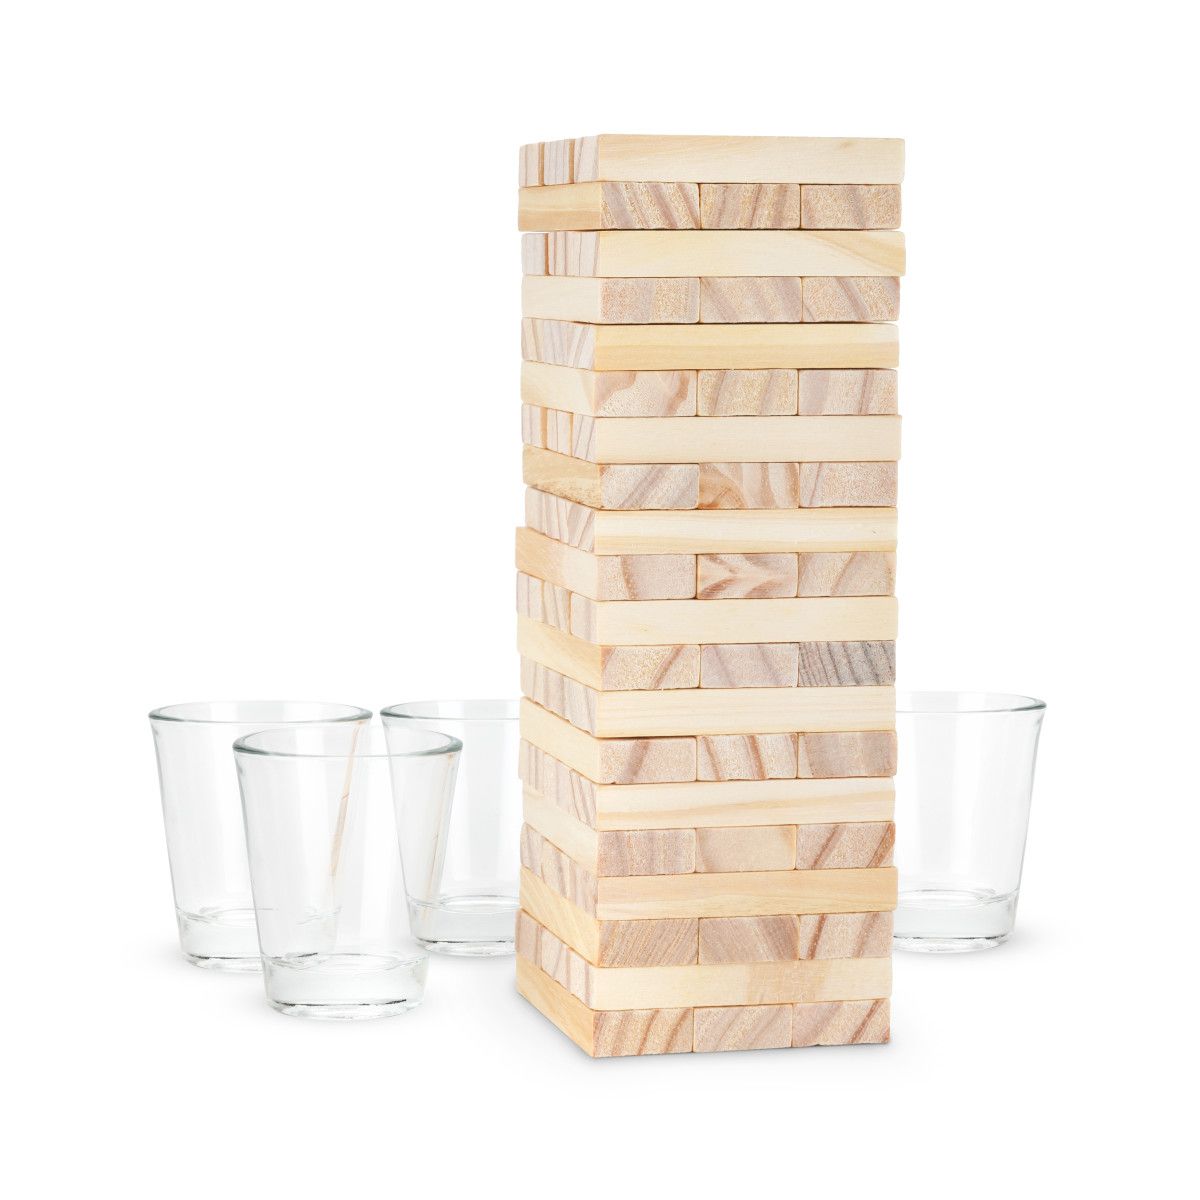 True Stack: Group Drinking Game - A Taste of Kentucky